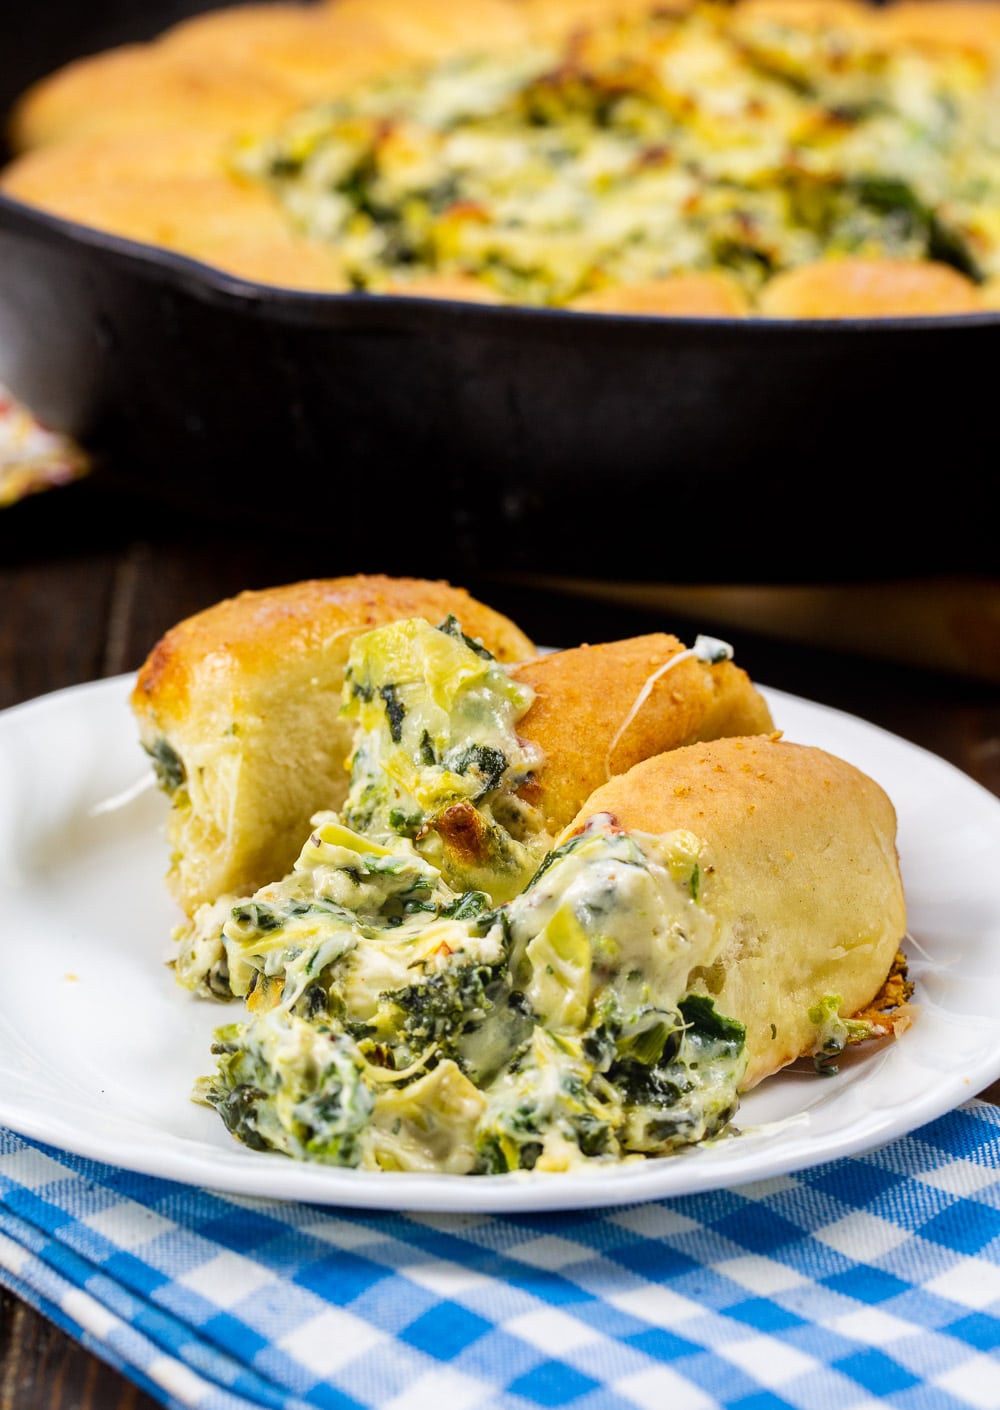 Rolls with Spinach Artichoke Dip on a plate.